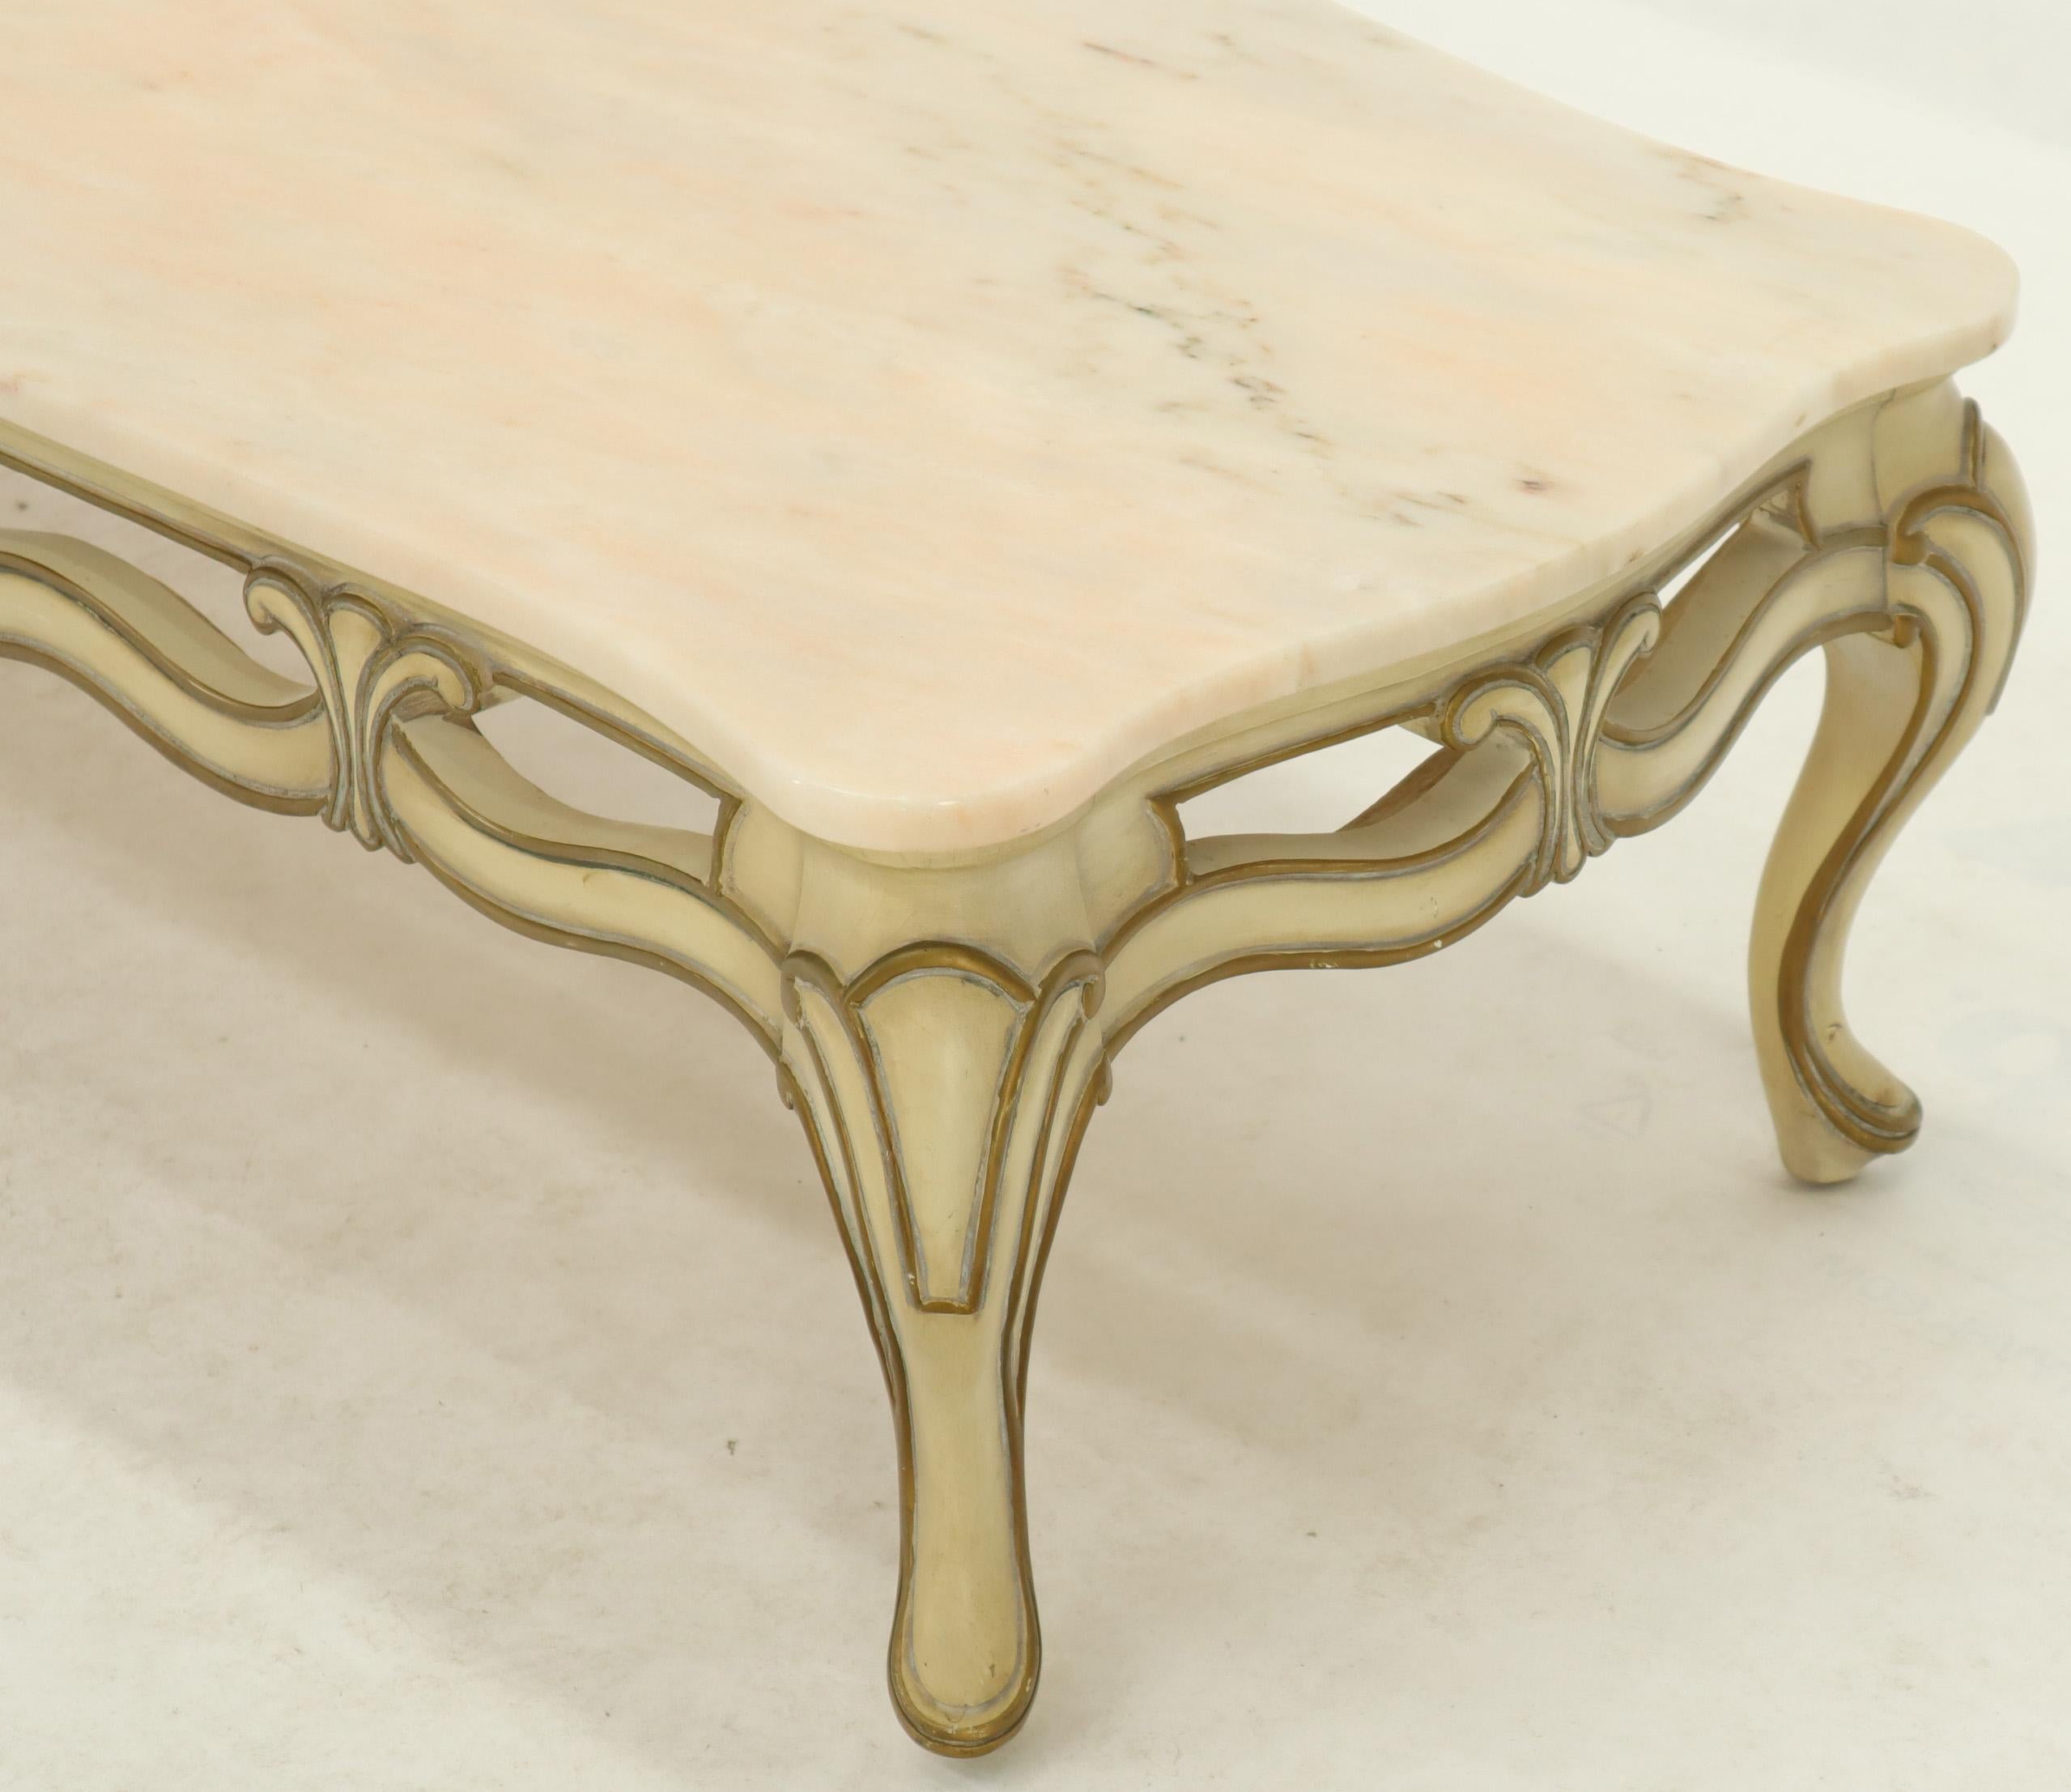 Carved Marble to Pierced Carving Country French Provincial Coffee Table Cabriole Legs